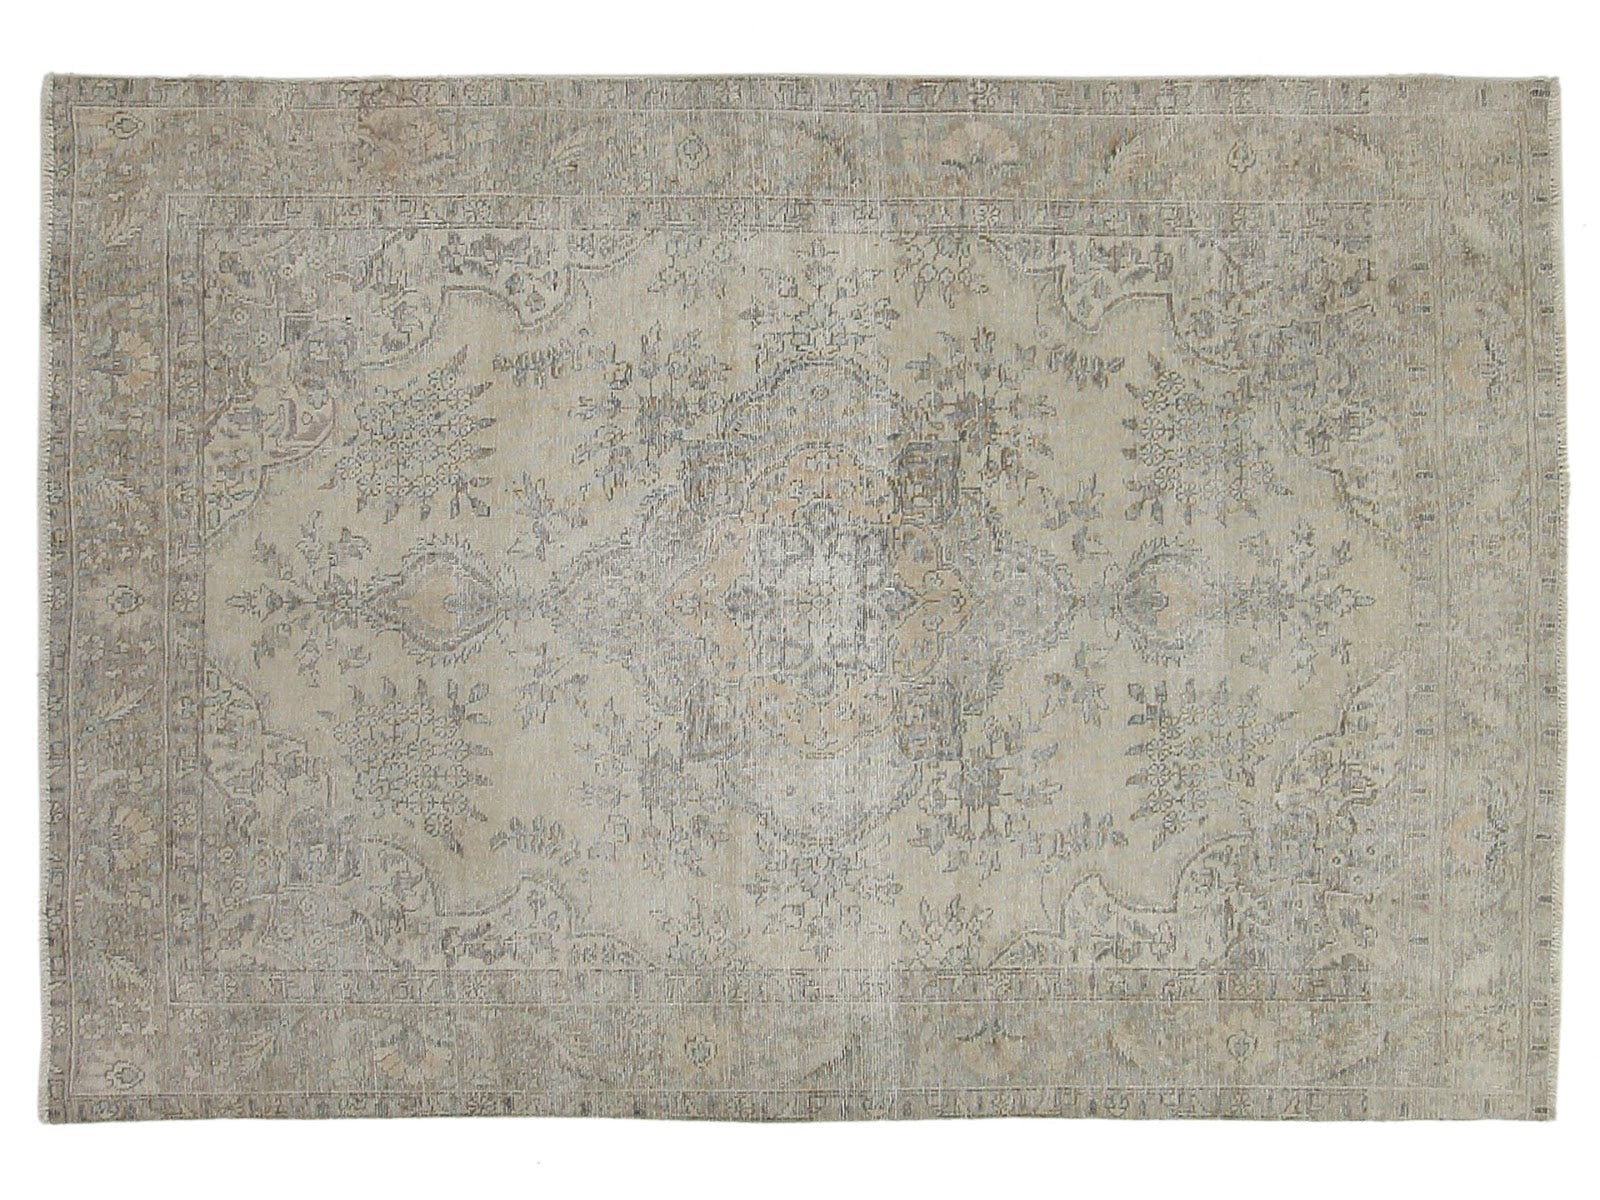 6x9 vintage Persian wool rug with a minimal medallion design in neutral faded colors, hand-knotted in Persia